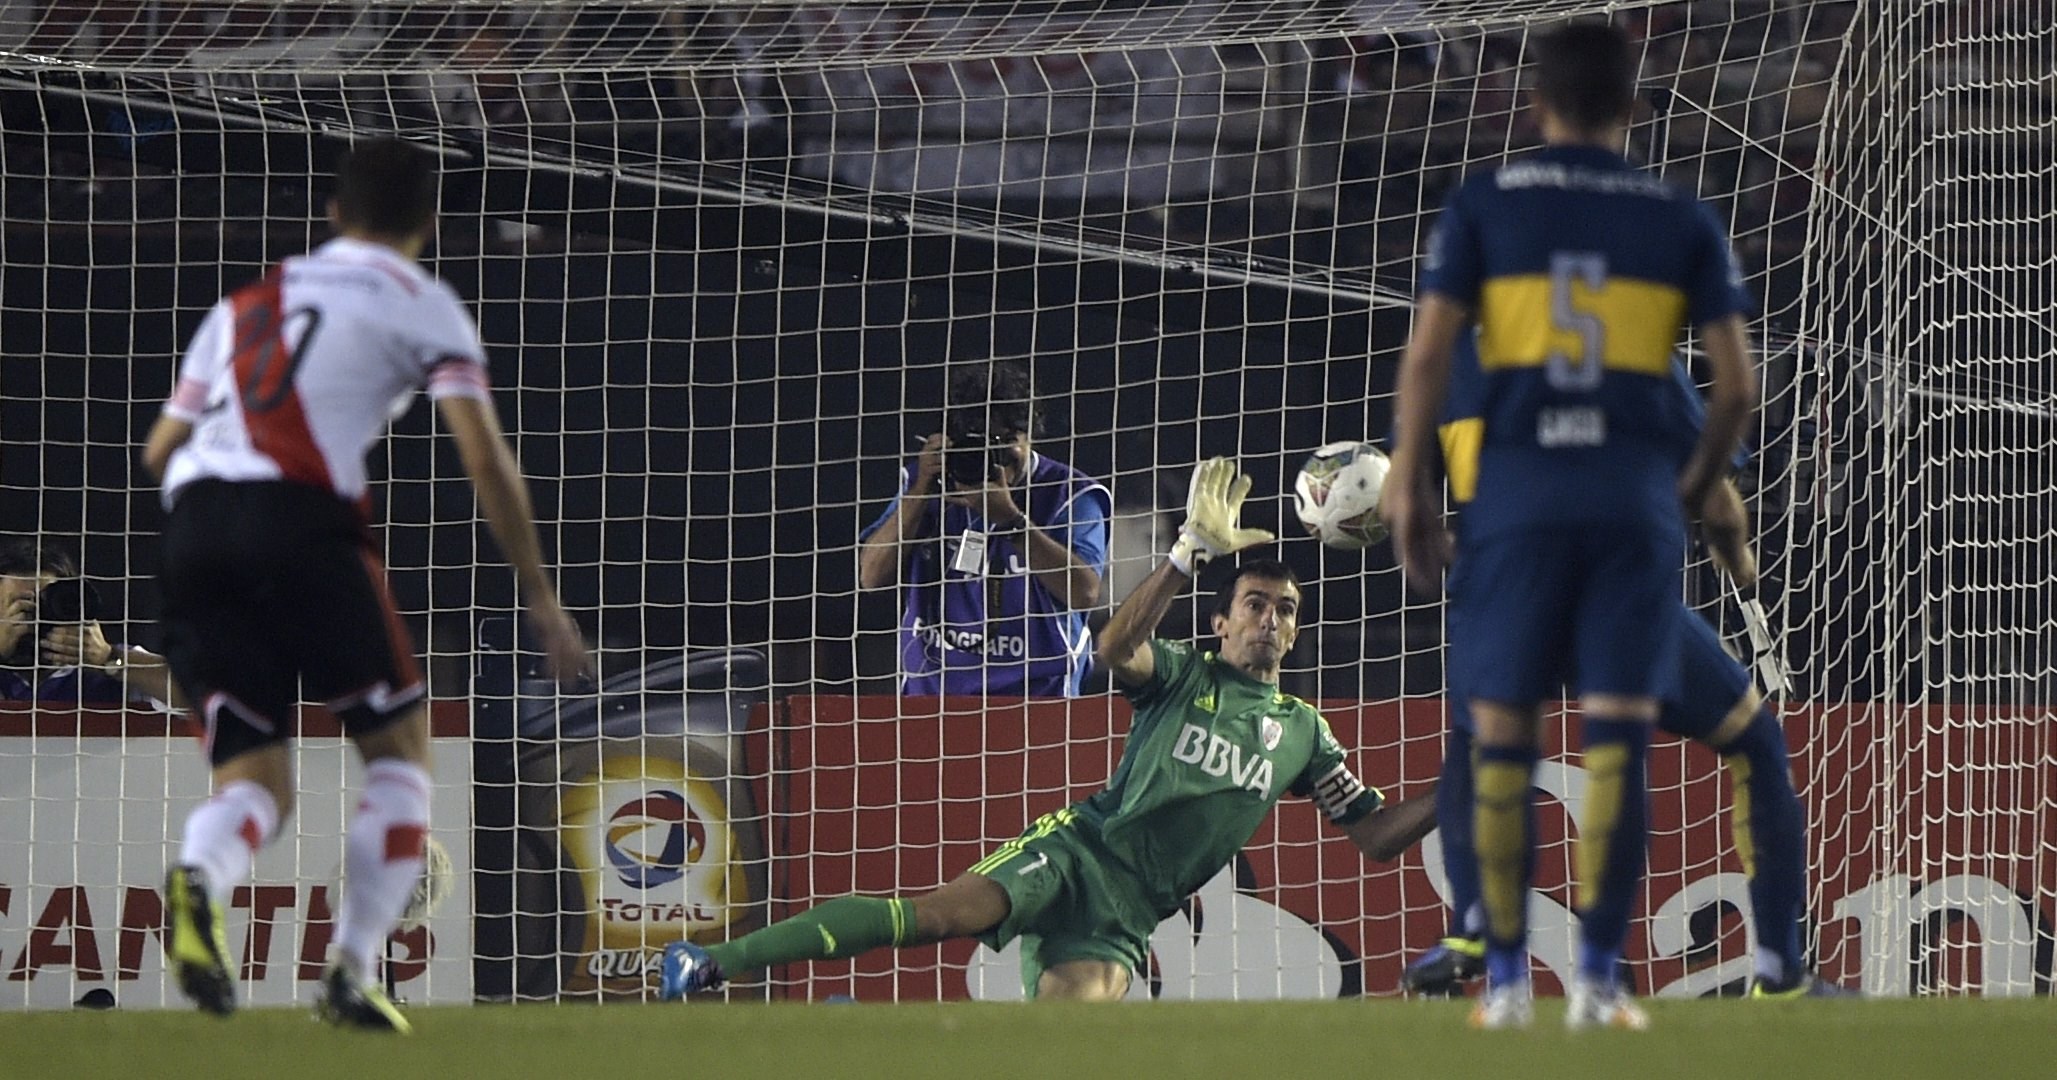 ‘Thank God for all of us’ – former River Plate goalkeeper on his penalty kick save in 2014 Copa Sudamericana semifinal against Boca Juniors